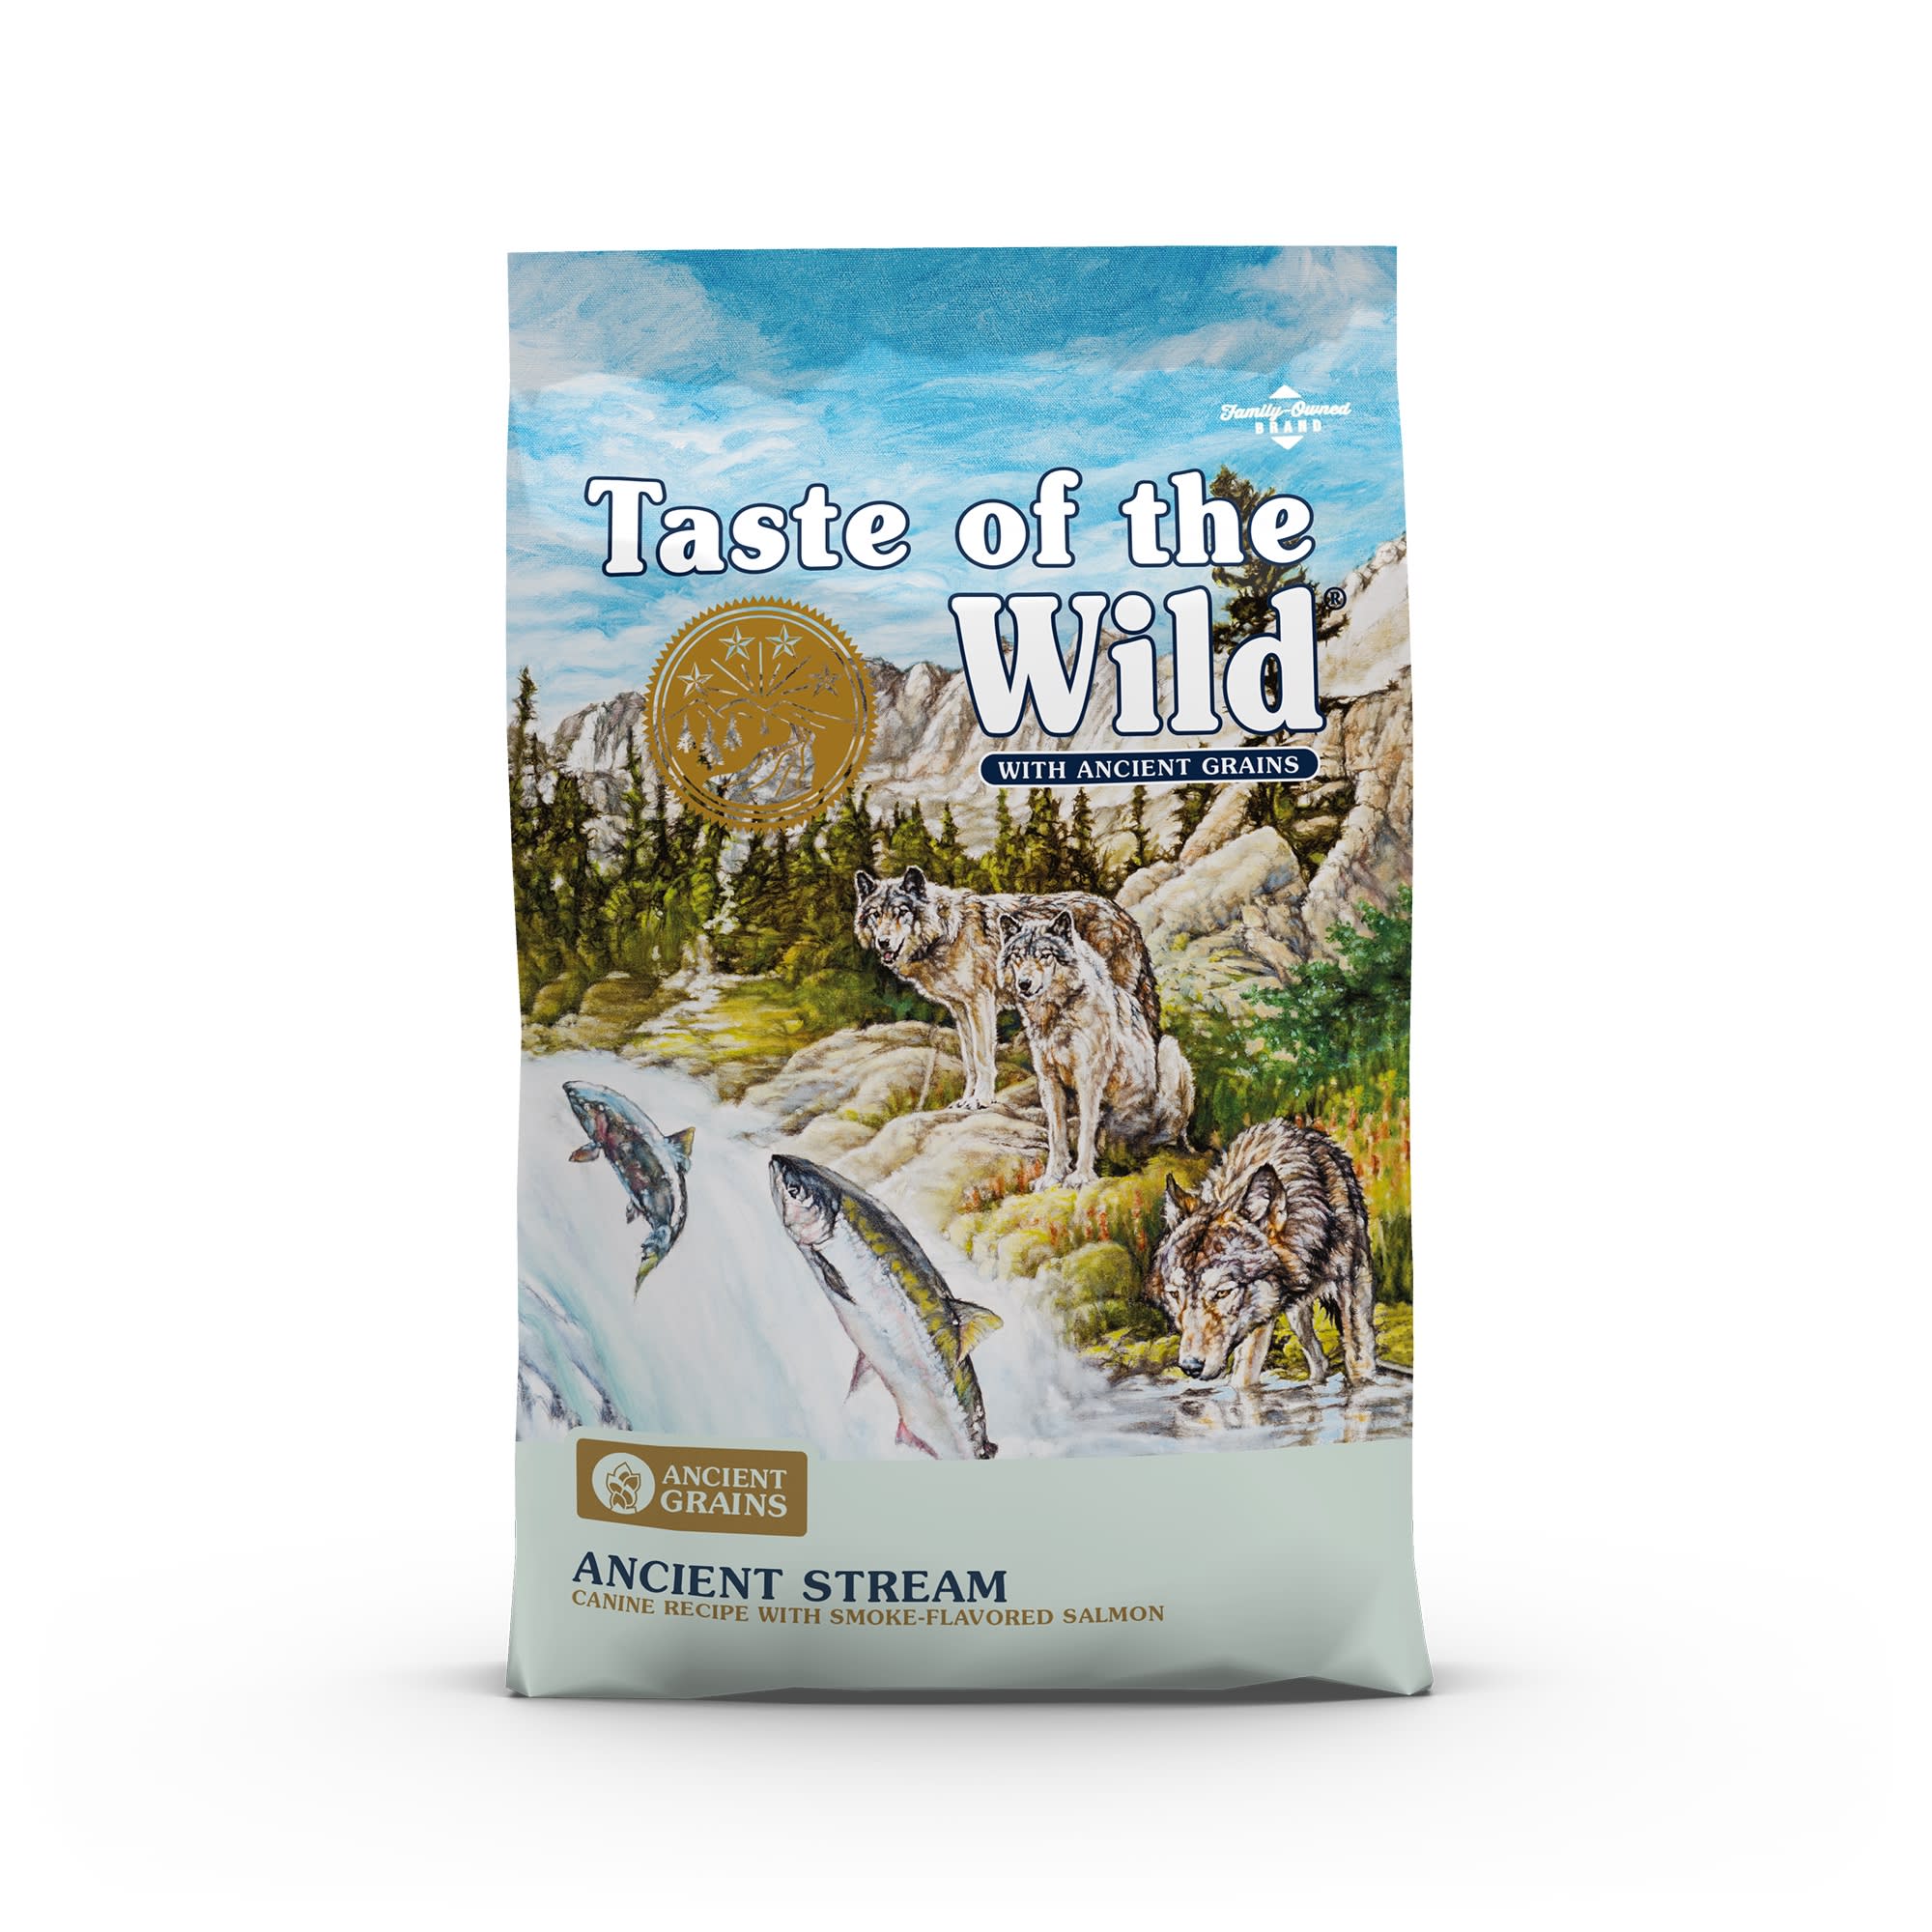 Taste of the Wild Ancient Stream Canine Recipe with Smoke-Flavored Salmon and Ancient Grains Dry Dog Food, 14 lbs.